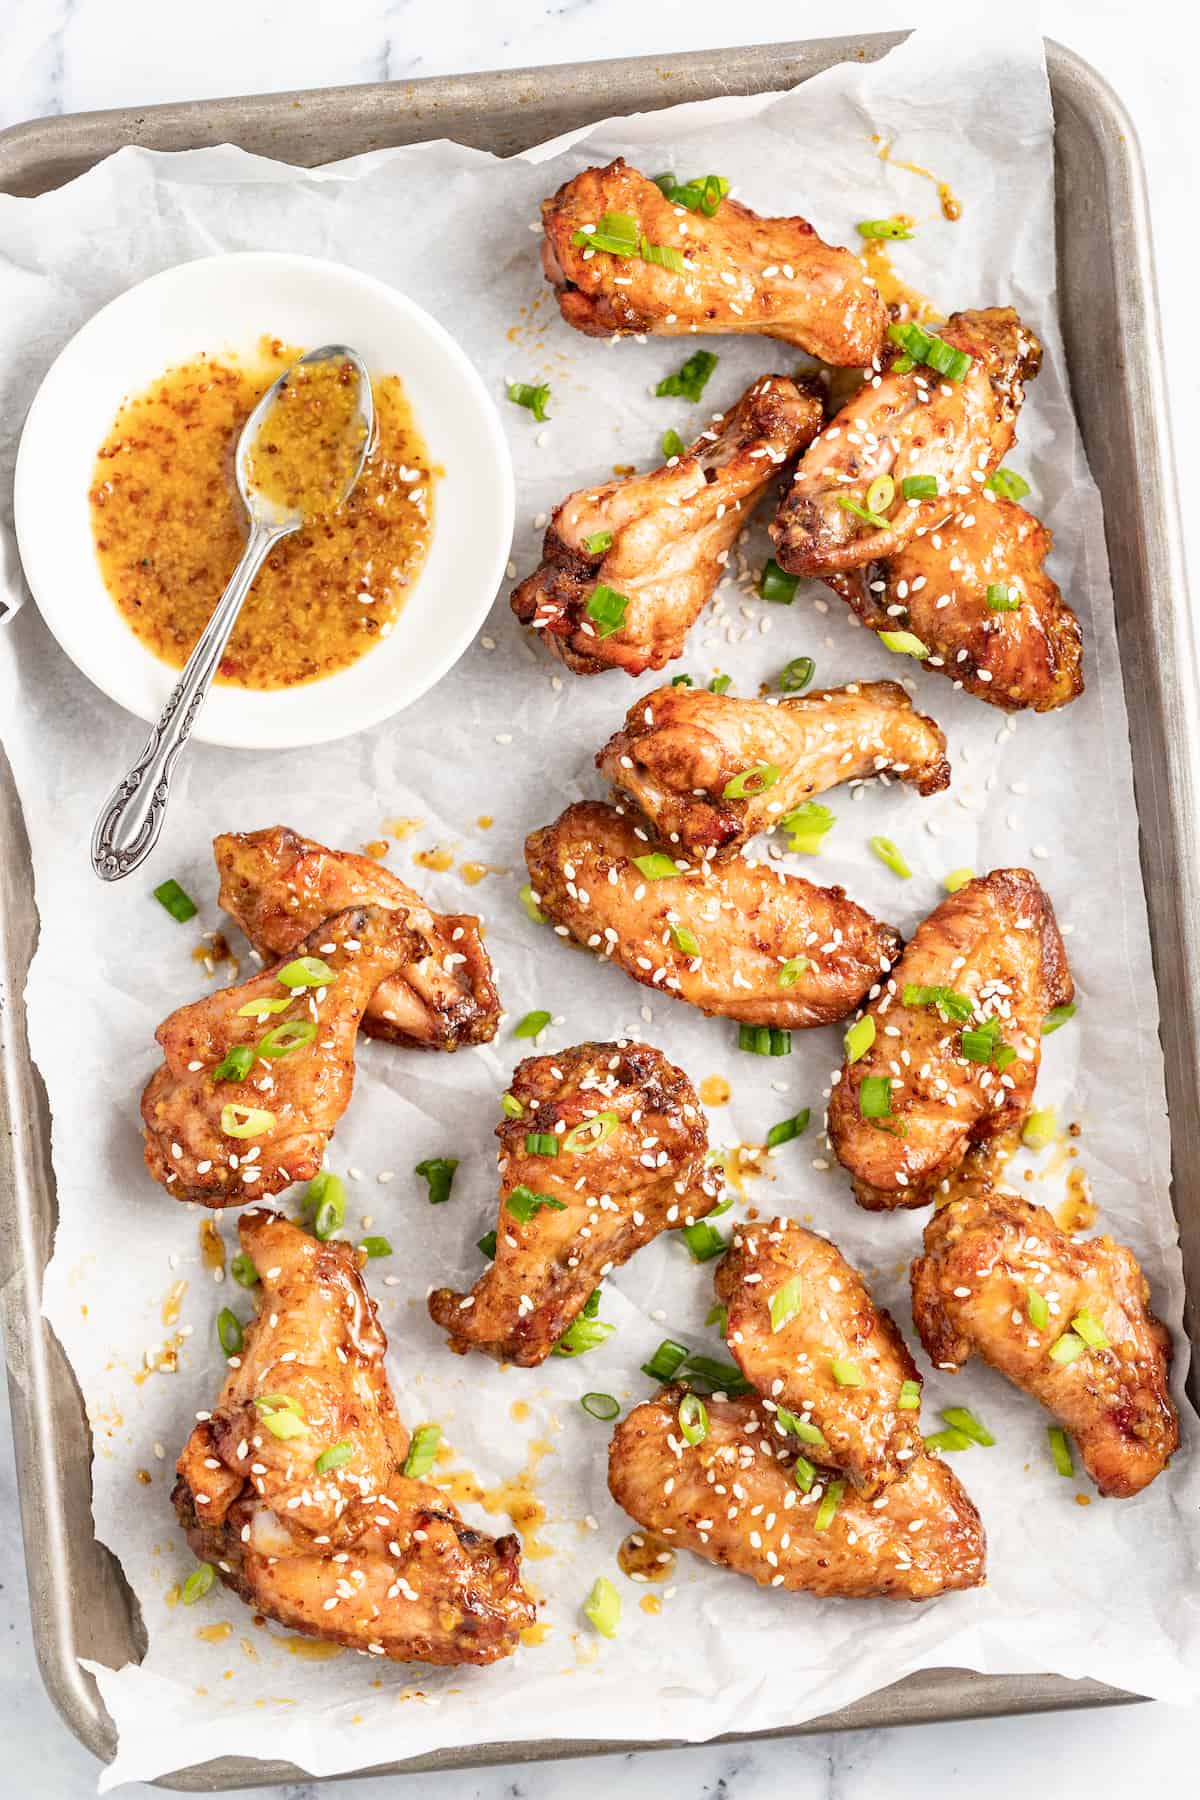 baked chicken wings on a lined sheet tray with sesame seed and herb garnish with a side of honey mustard sauce